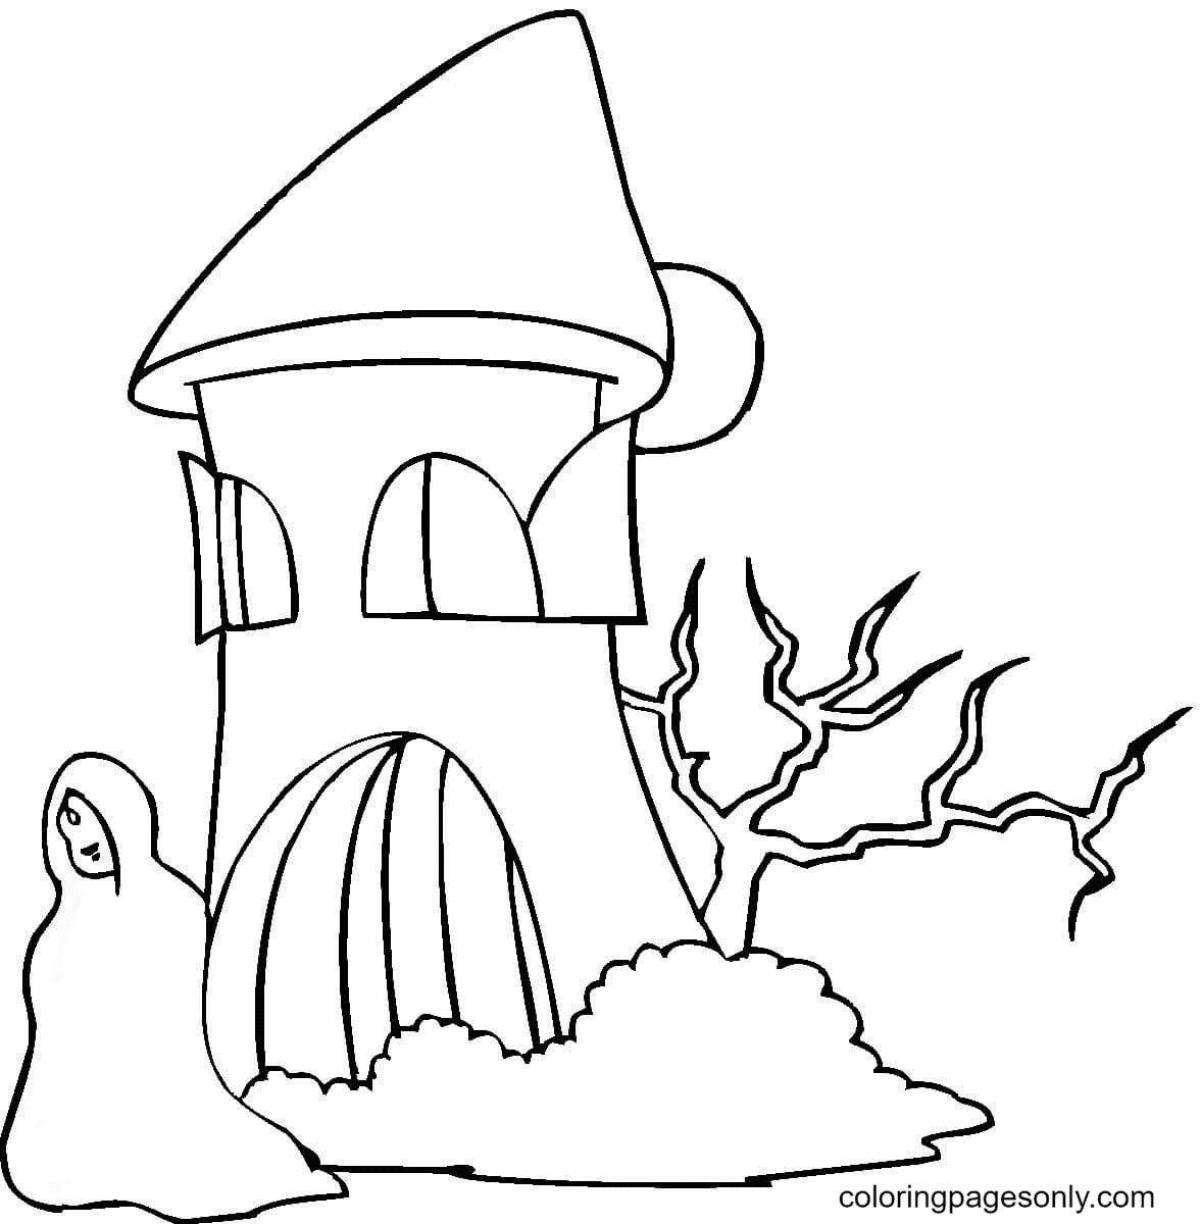 Coloring page chilling gloomy house